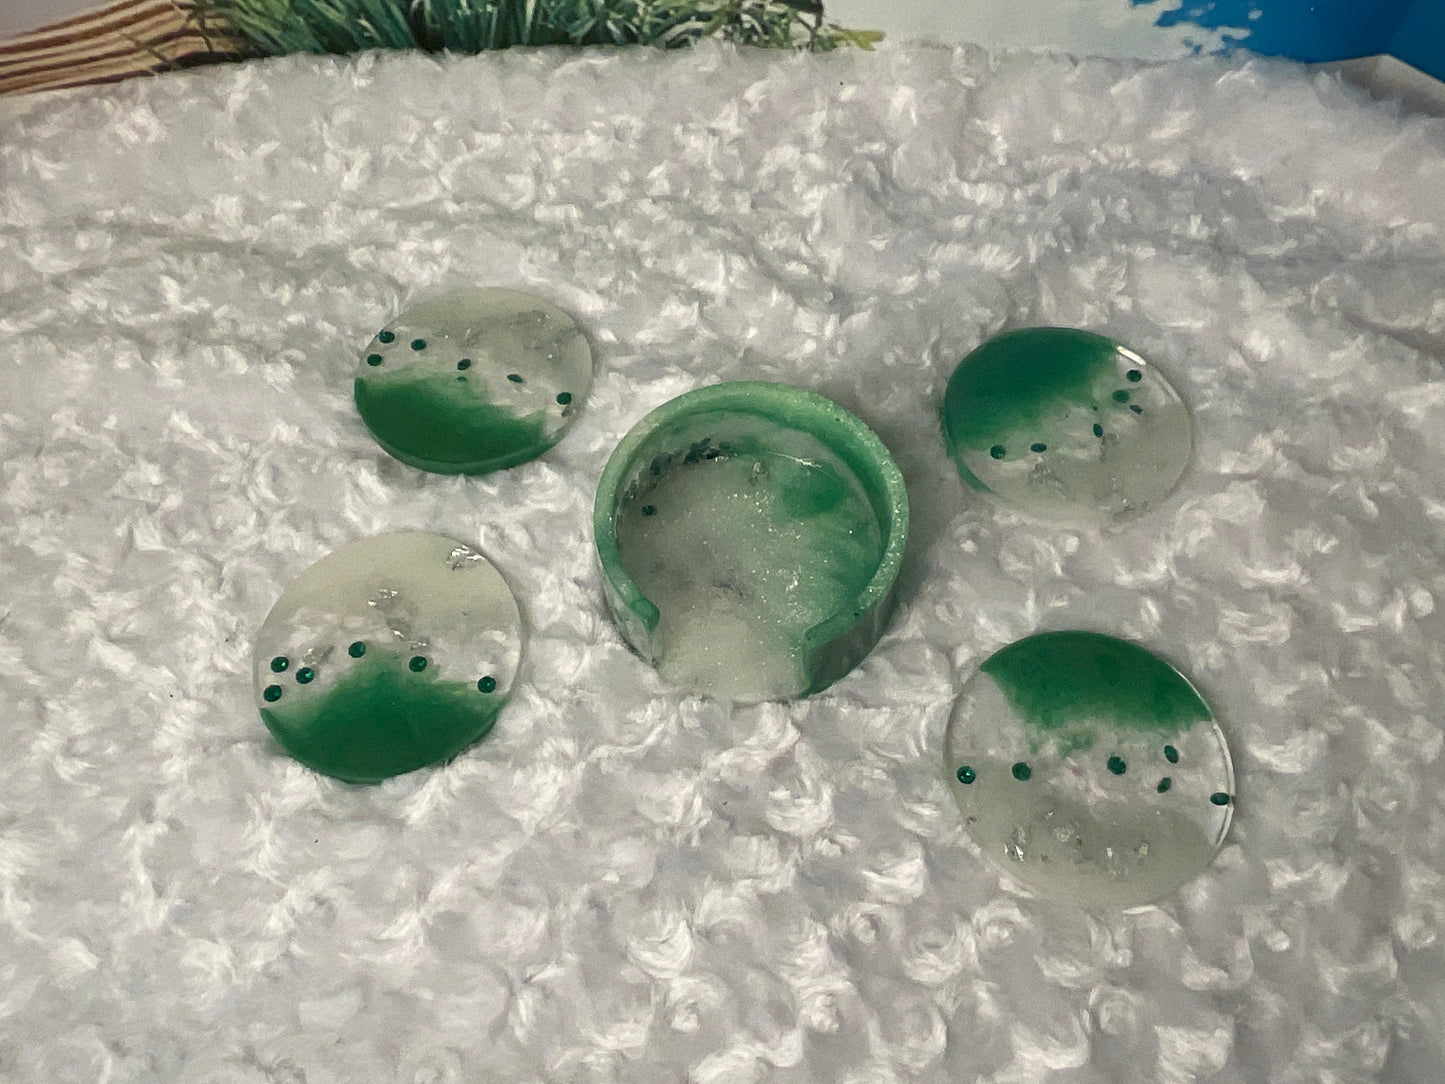 Emerald Green Resin Coaster Set and Holder | Set of 4 Round Coasters | Housewarming Gift Coasters | Coffee Table Decor |